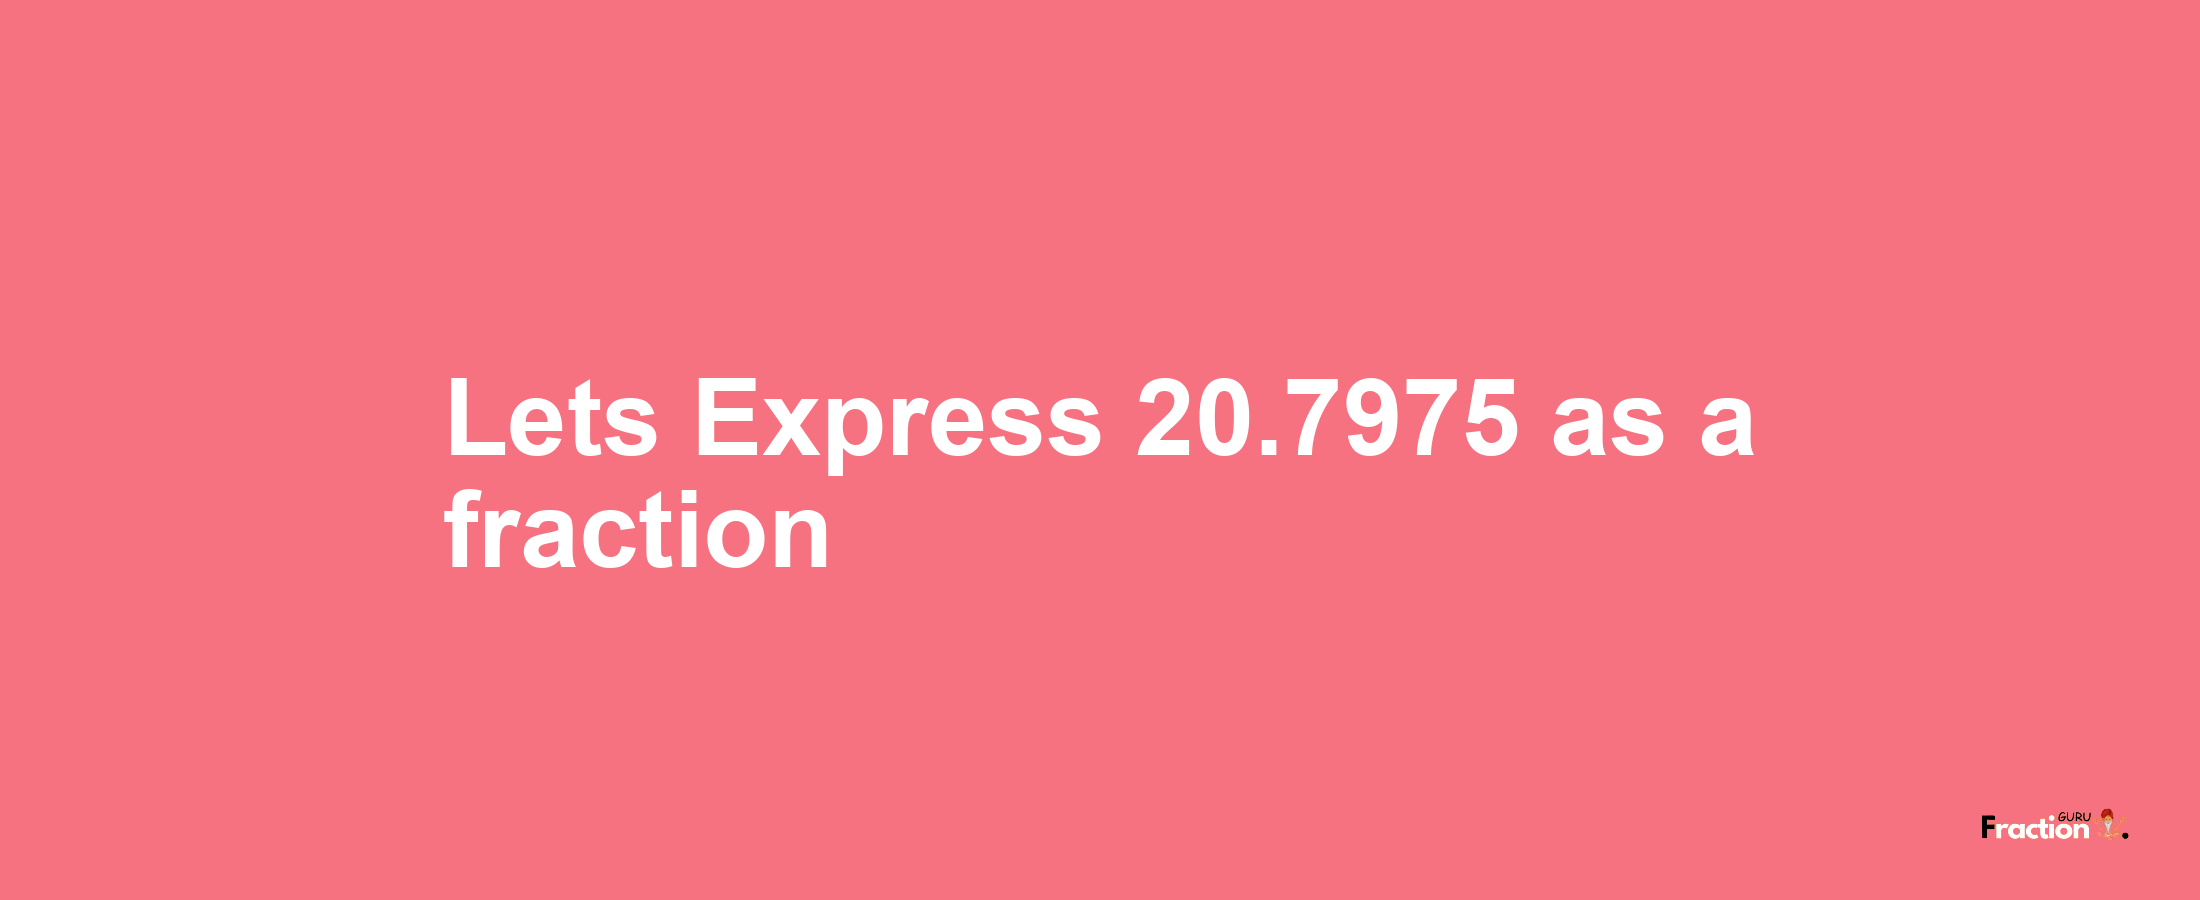 Lets Express 20.7975 as afraction